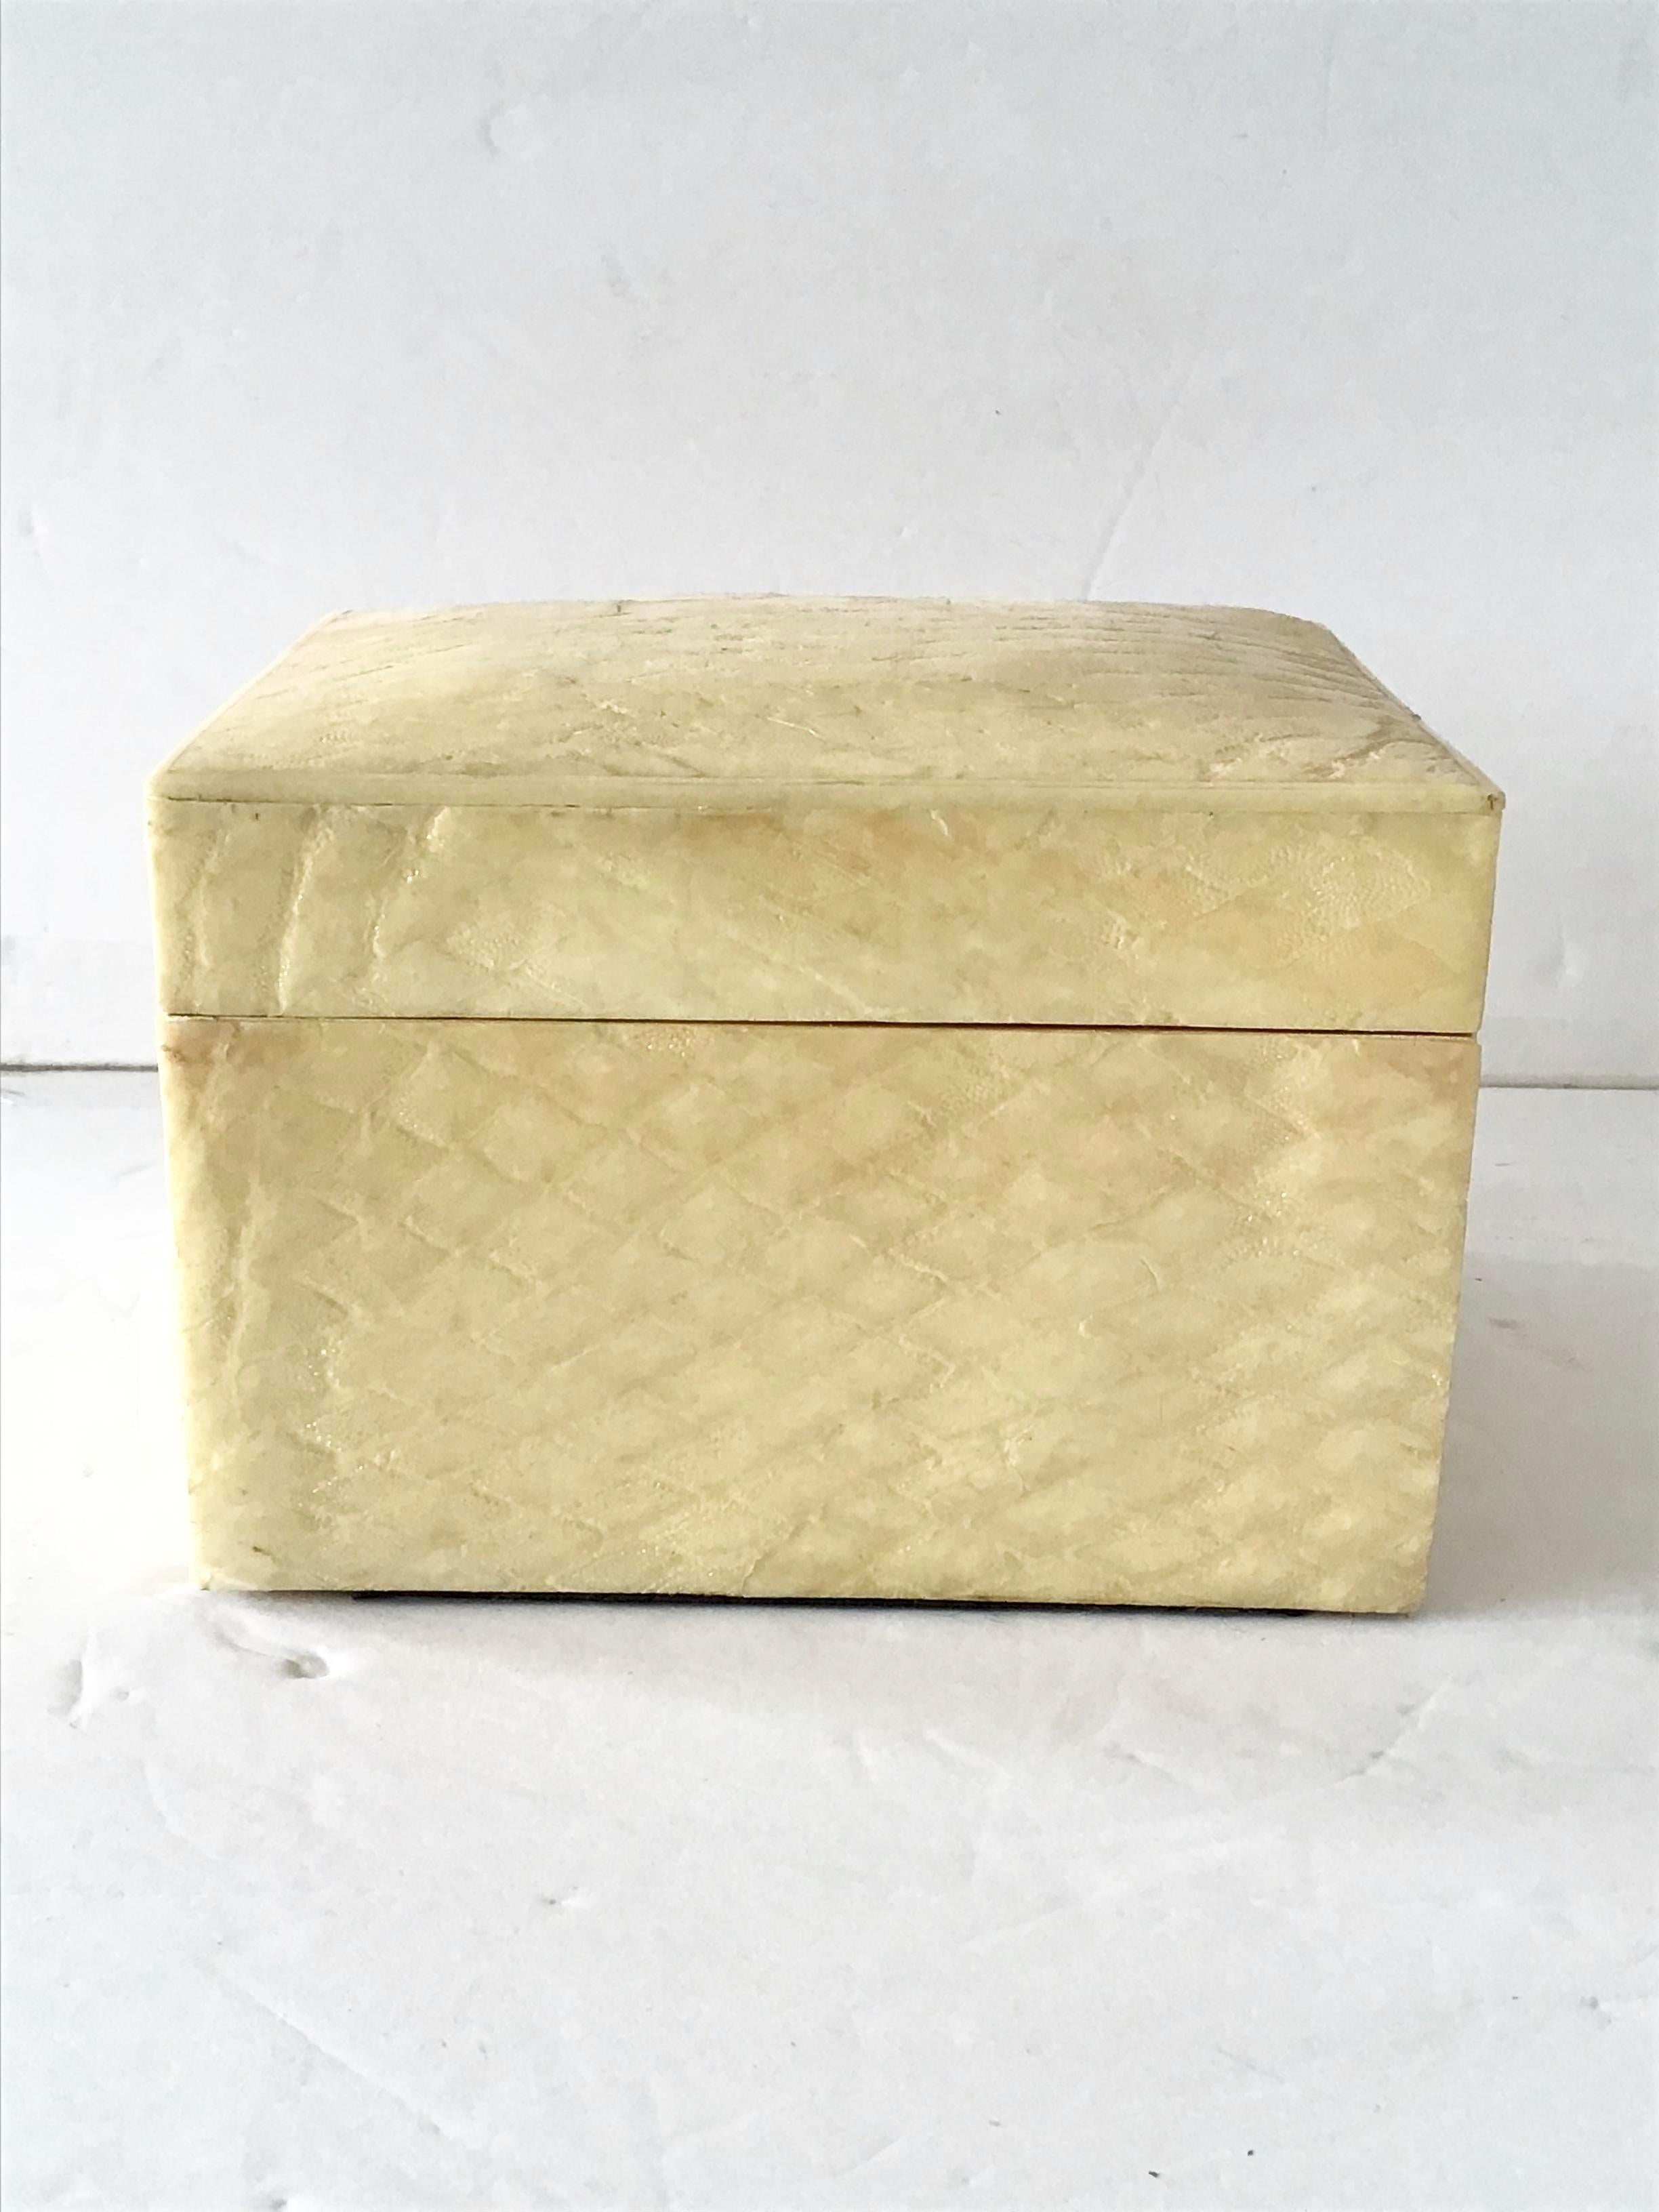 Beautiful snake skin covered box lacquered in a natural bone color. Wonderful vintage condition.